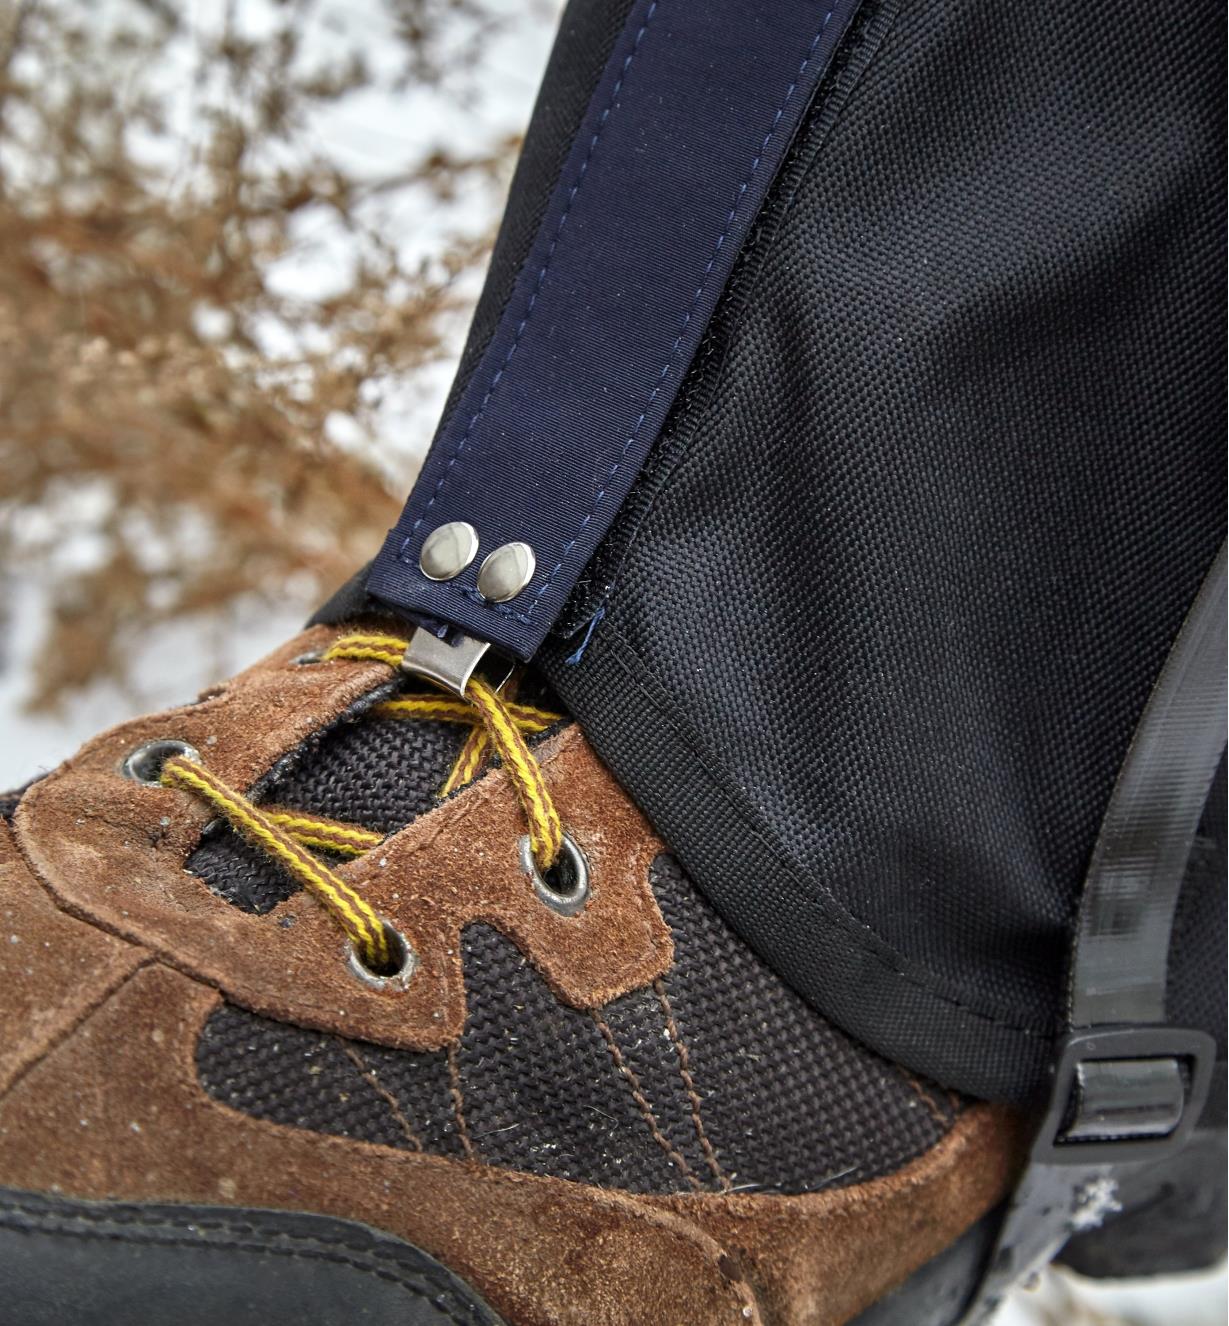 The lace hook on the nylon gaiter is reinforced with rivets for strength